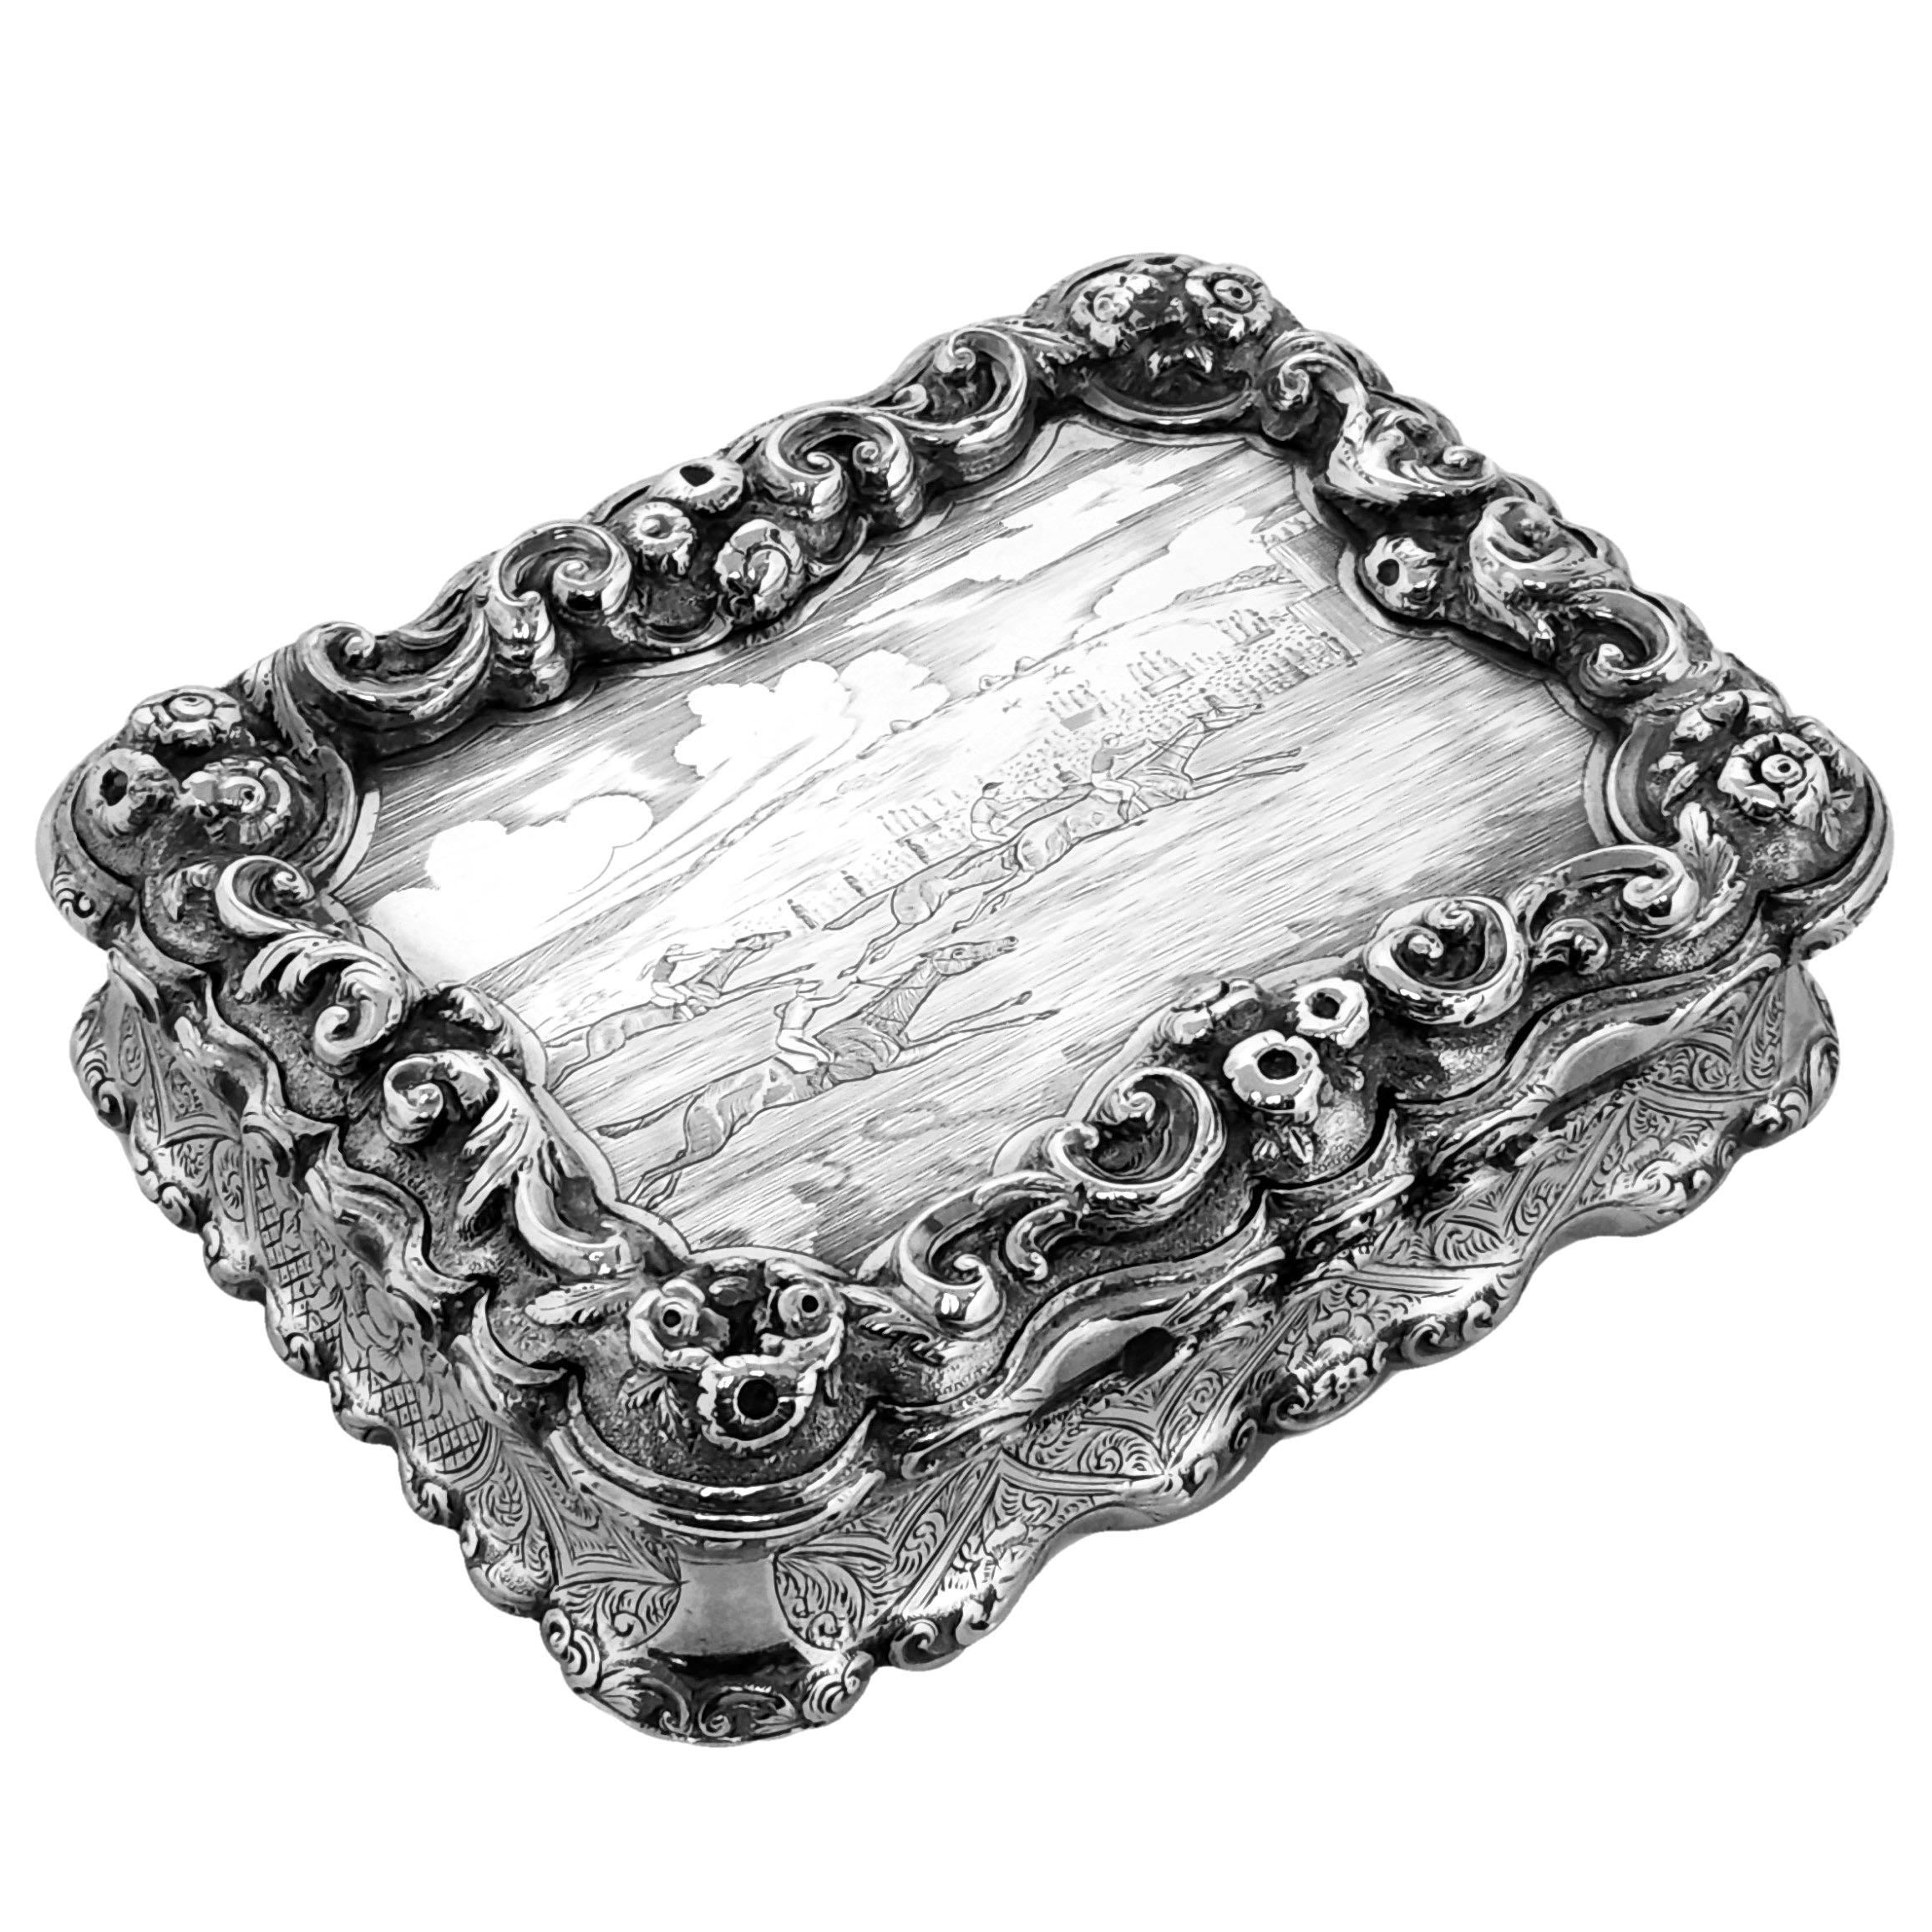 Antique Victorian Silver Decorative Table Snuff Box 1861 Horse Racing In Good Condition For Sale In London, GB